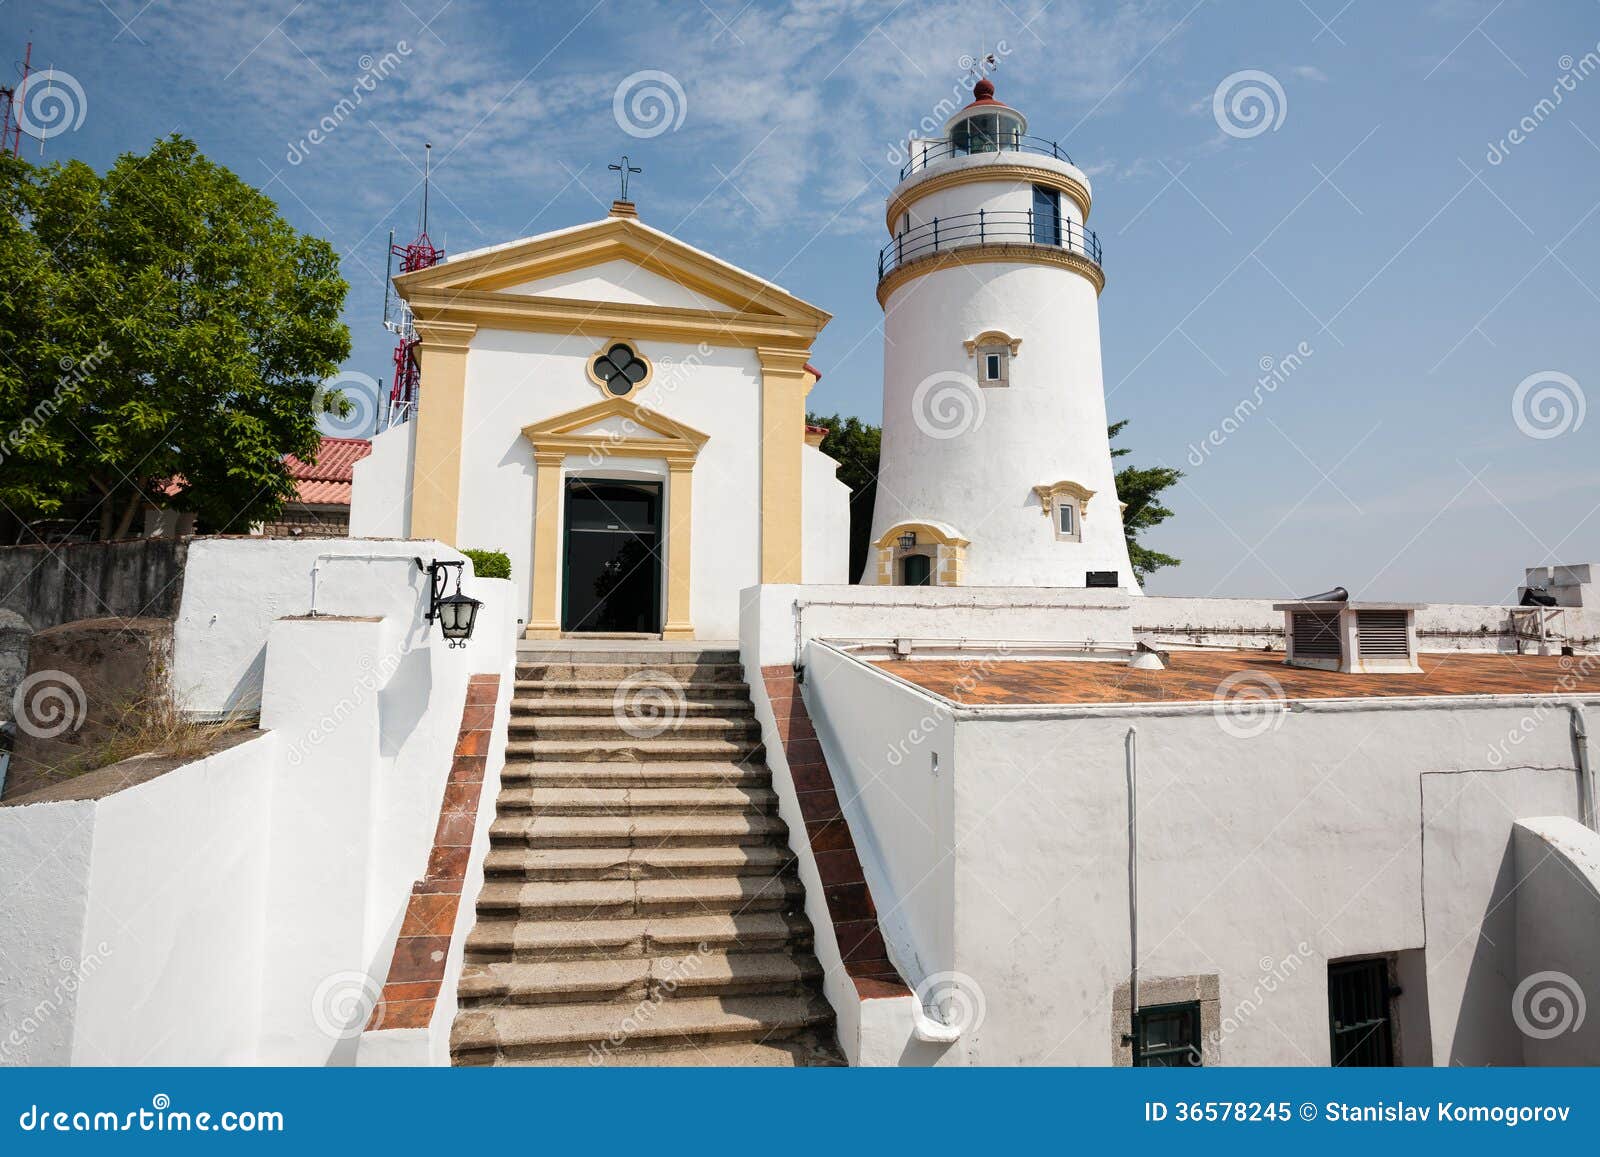 guia lighthouse, fortress and chapel in macau